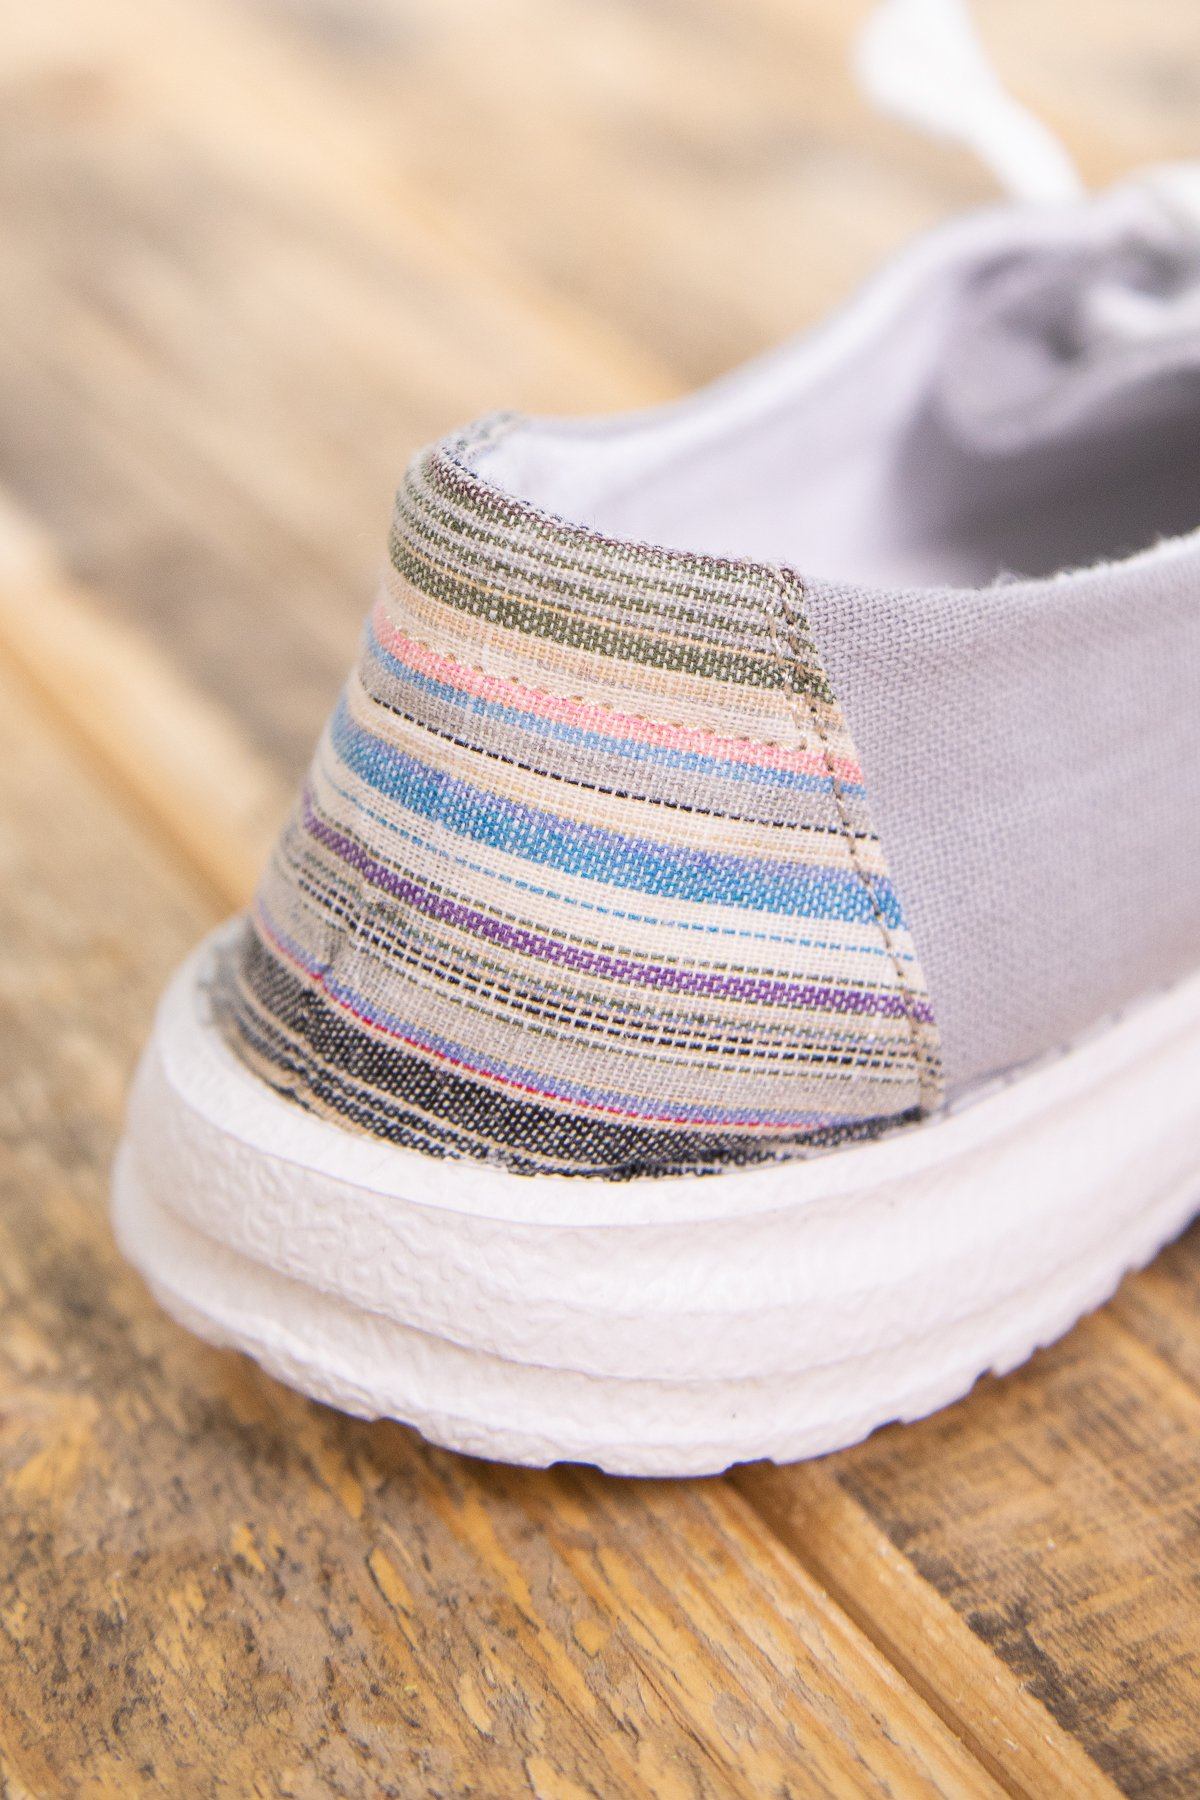 Grey Slip On Shoe with Multicolor Heel - Filly Flair